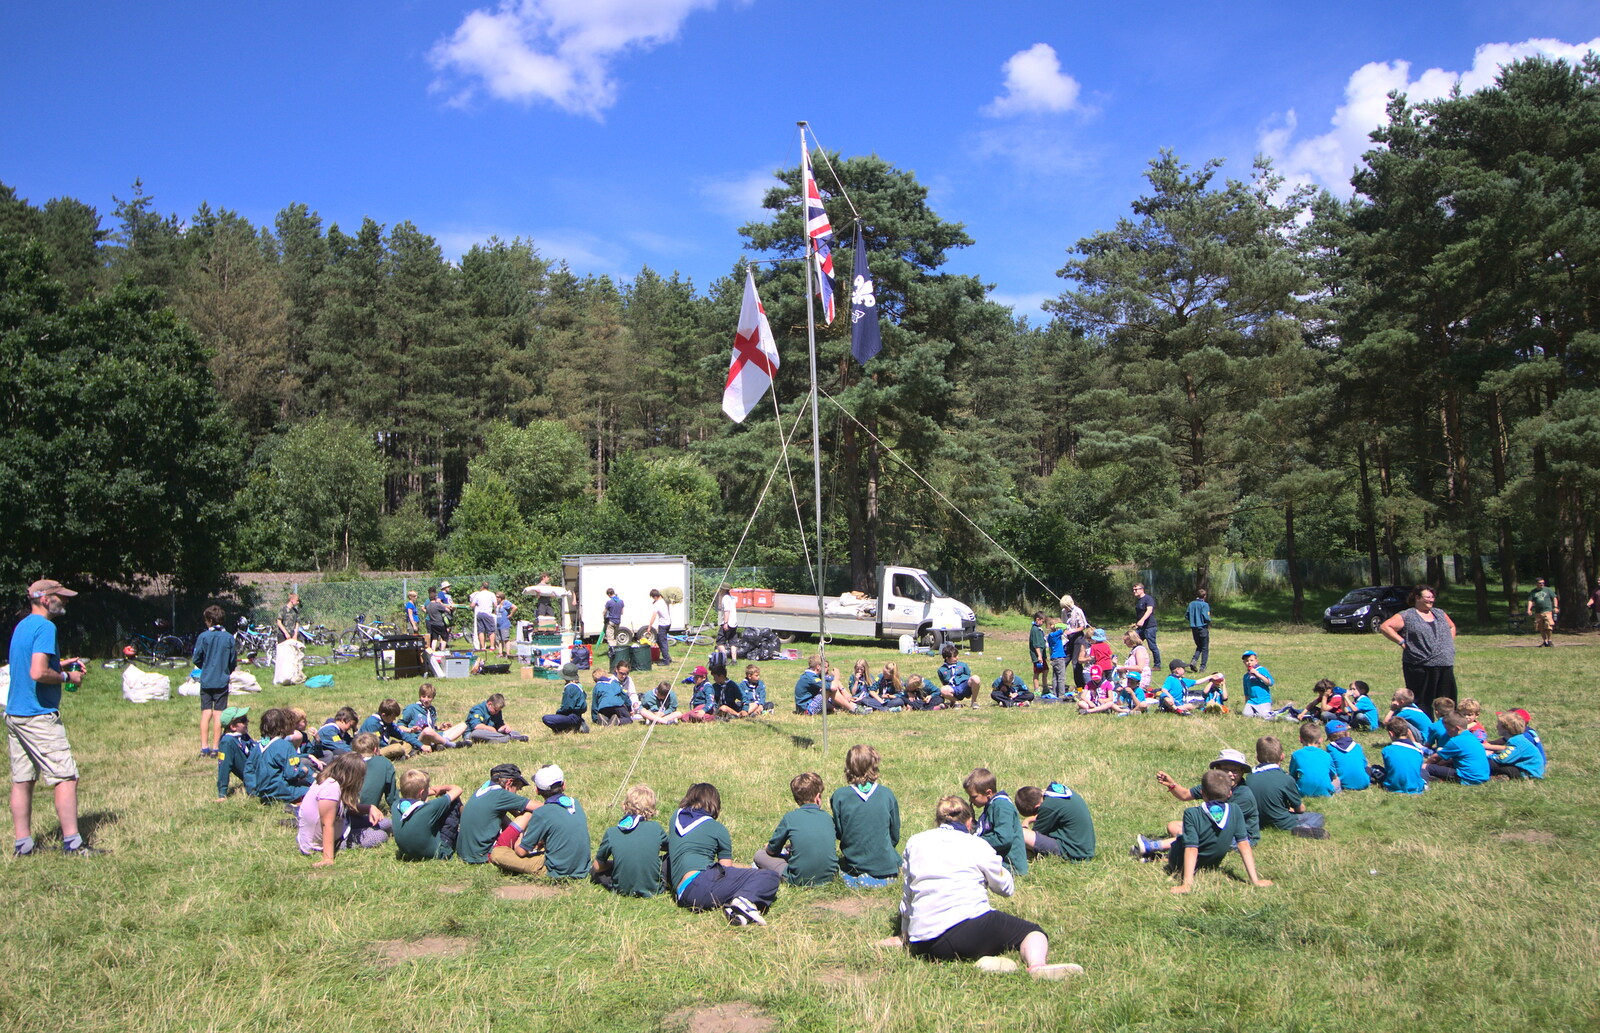 All the Scouts, Cubs and Beavers around the flag from Fred's Camping, Curry and the Closing of B&Q, Thetford, Diss  and Ipswich - 16th July 2016